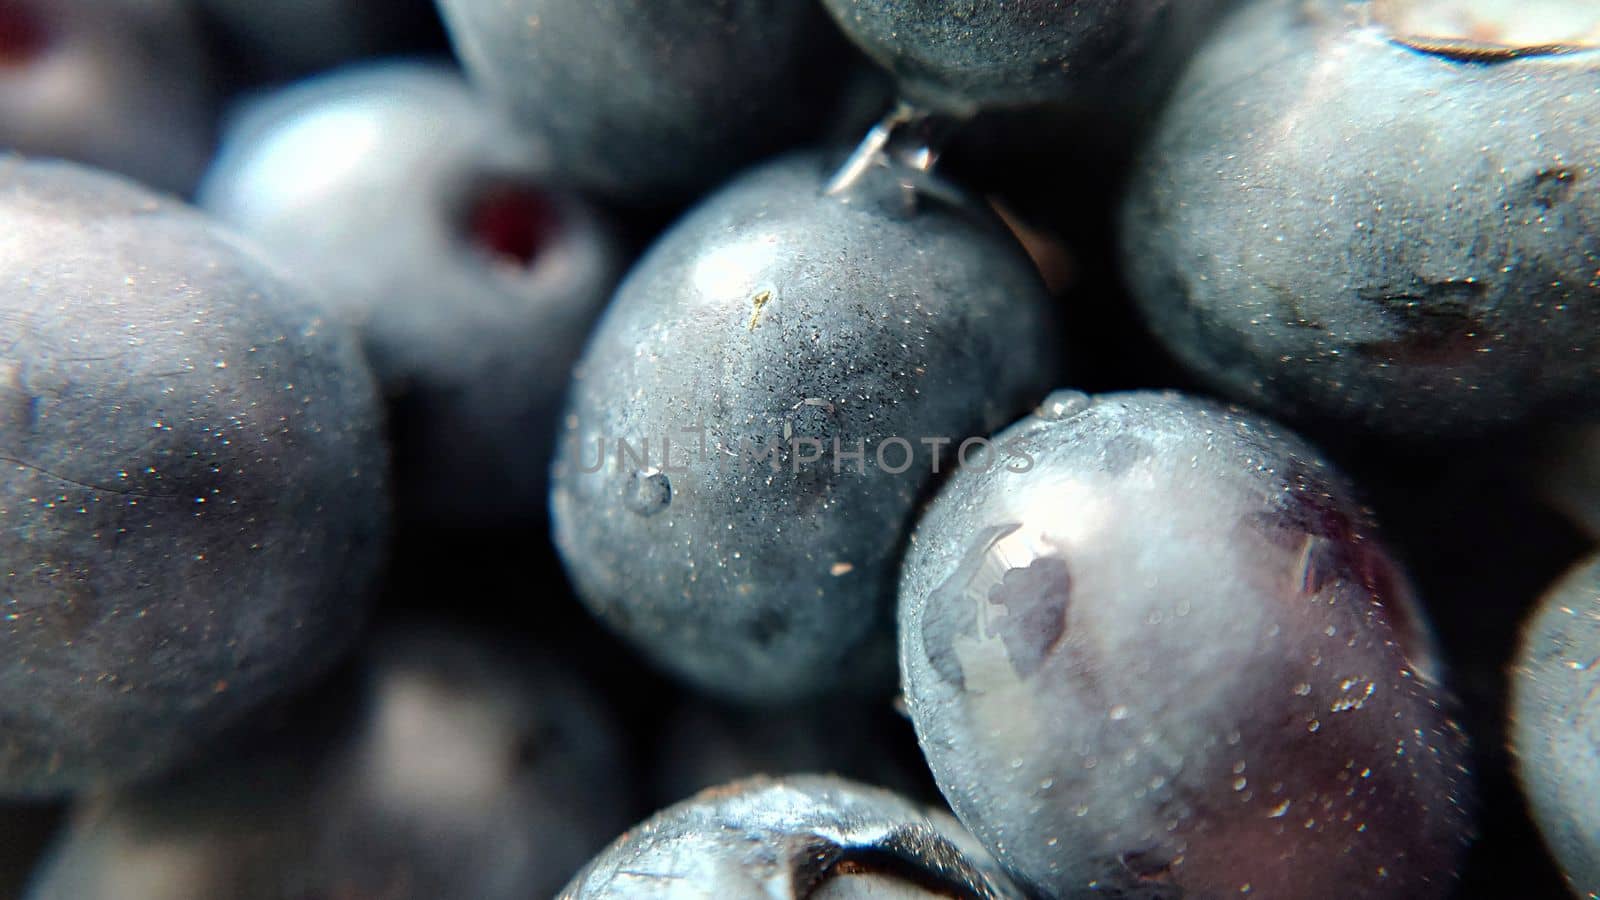 Background image of ripe blueberries in close-up.Macro photography.Texture or background.Selective focus.